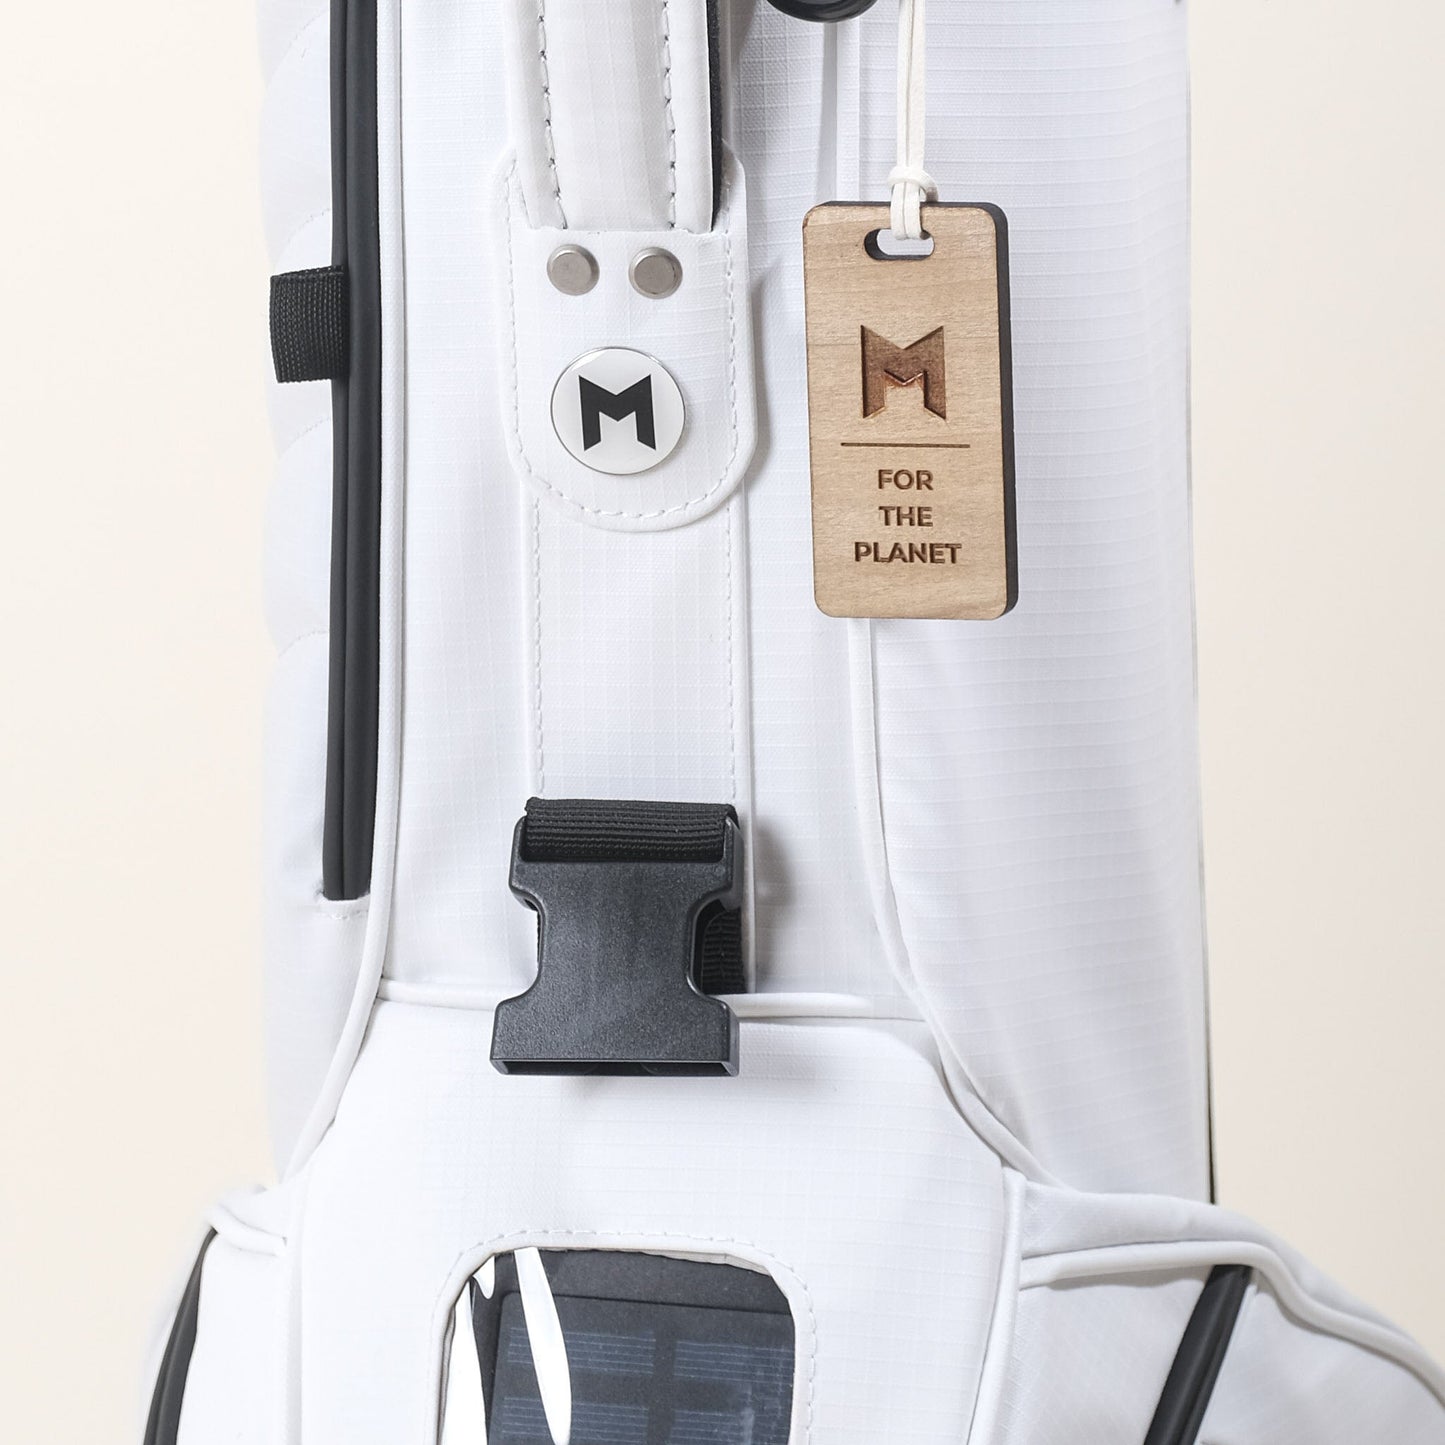 MNML GOLF's new MR1 sustainable golf bag comes in black and white and comes with a magnetic ball marker.